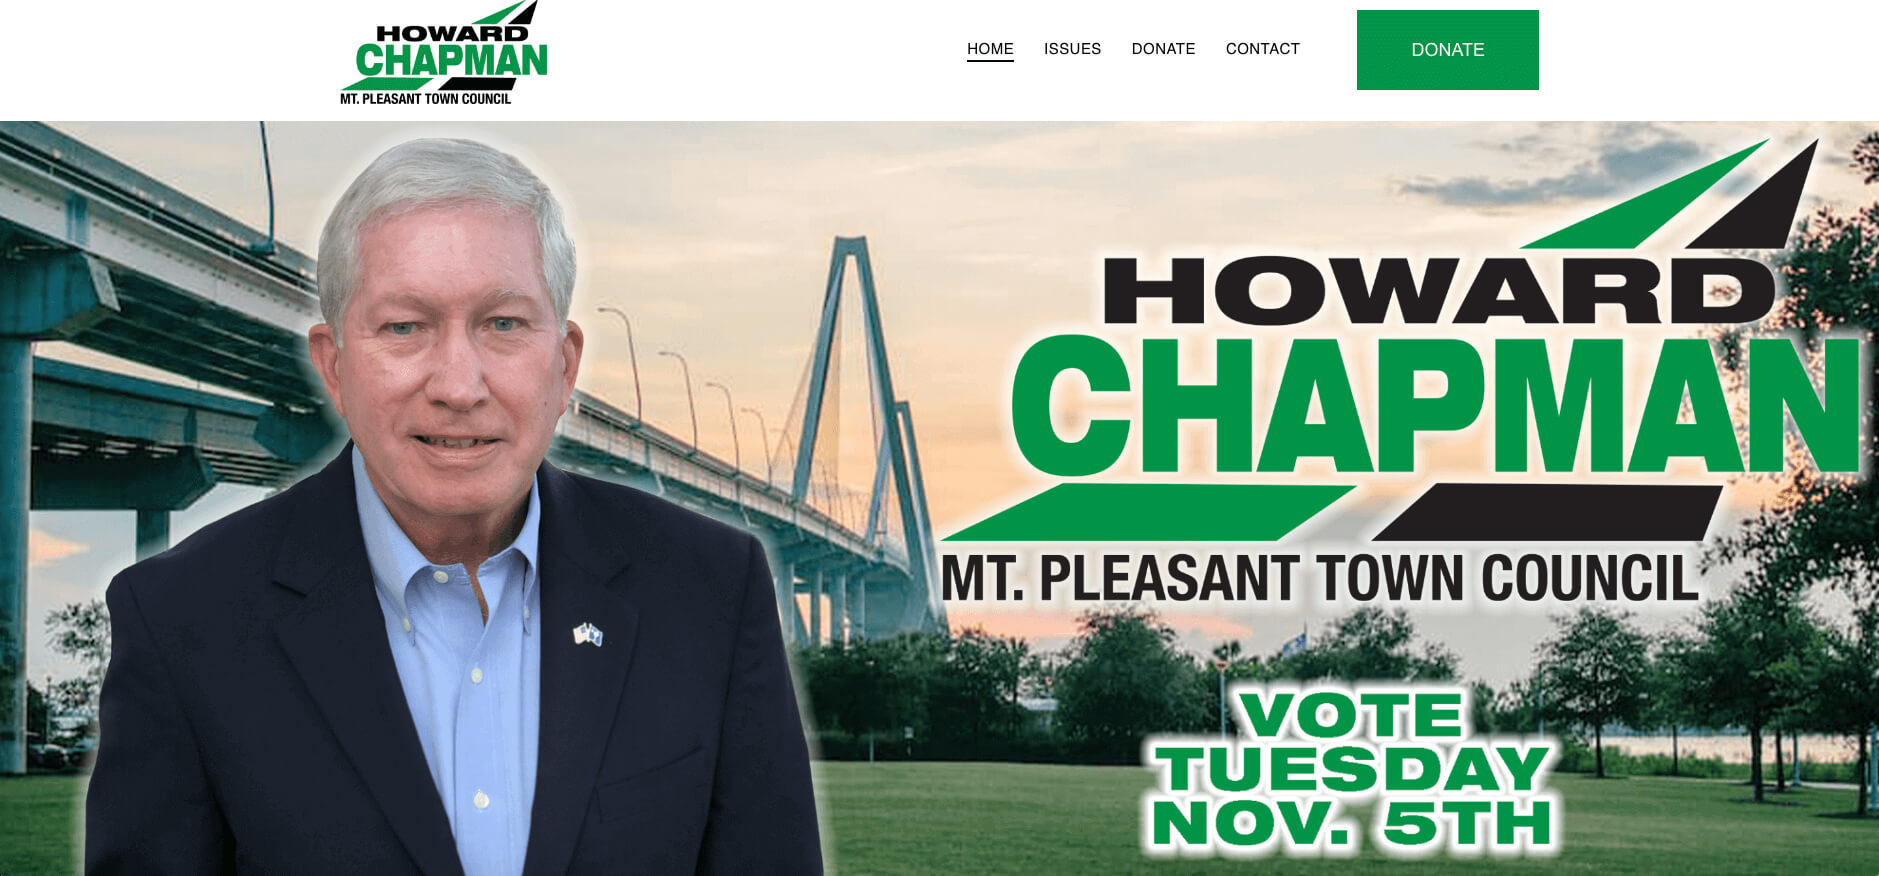 howard chapman town council website for campaign